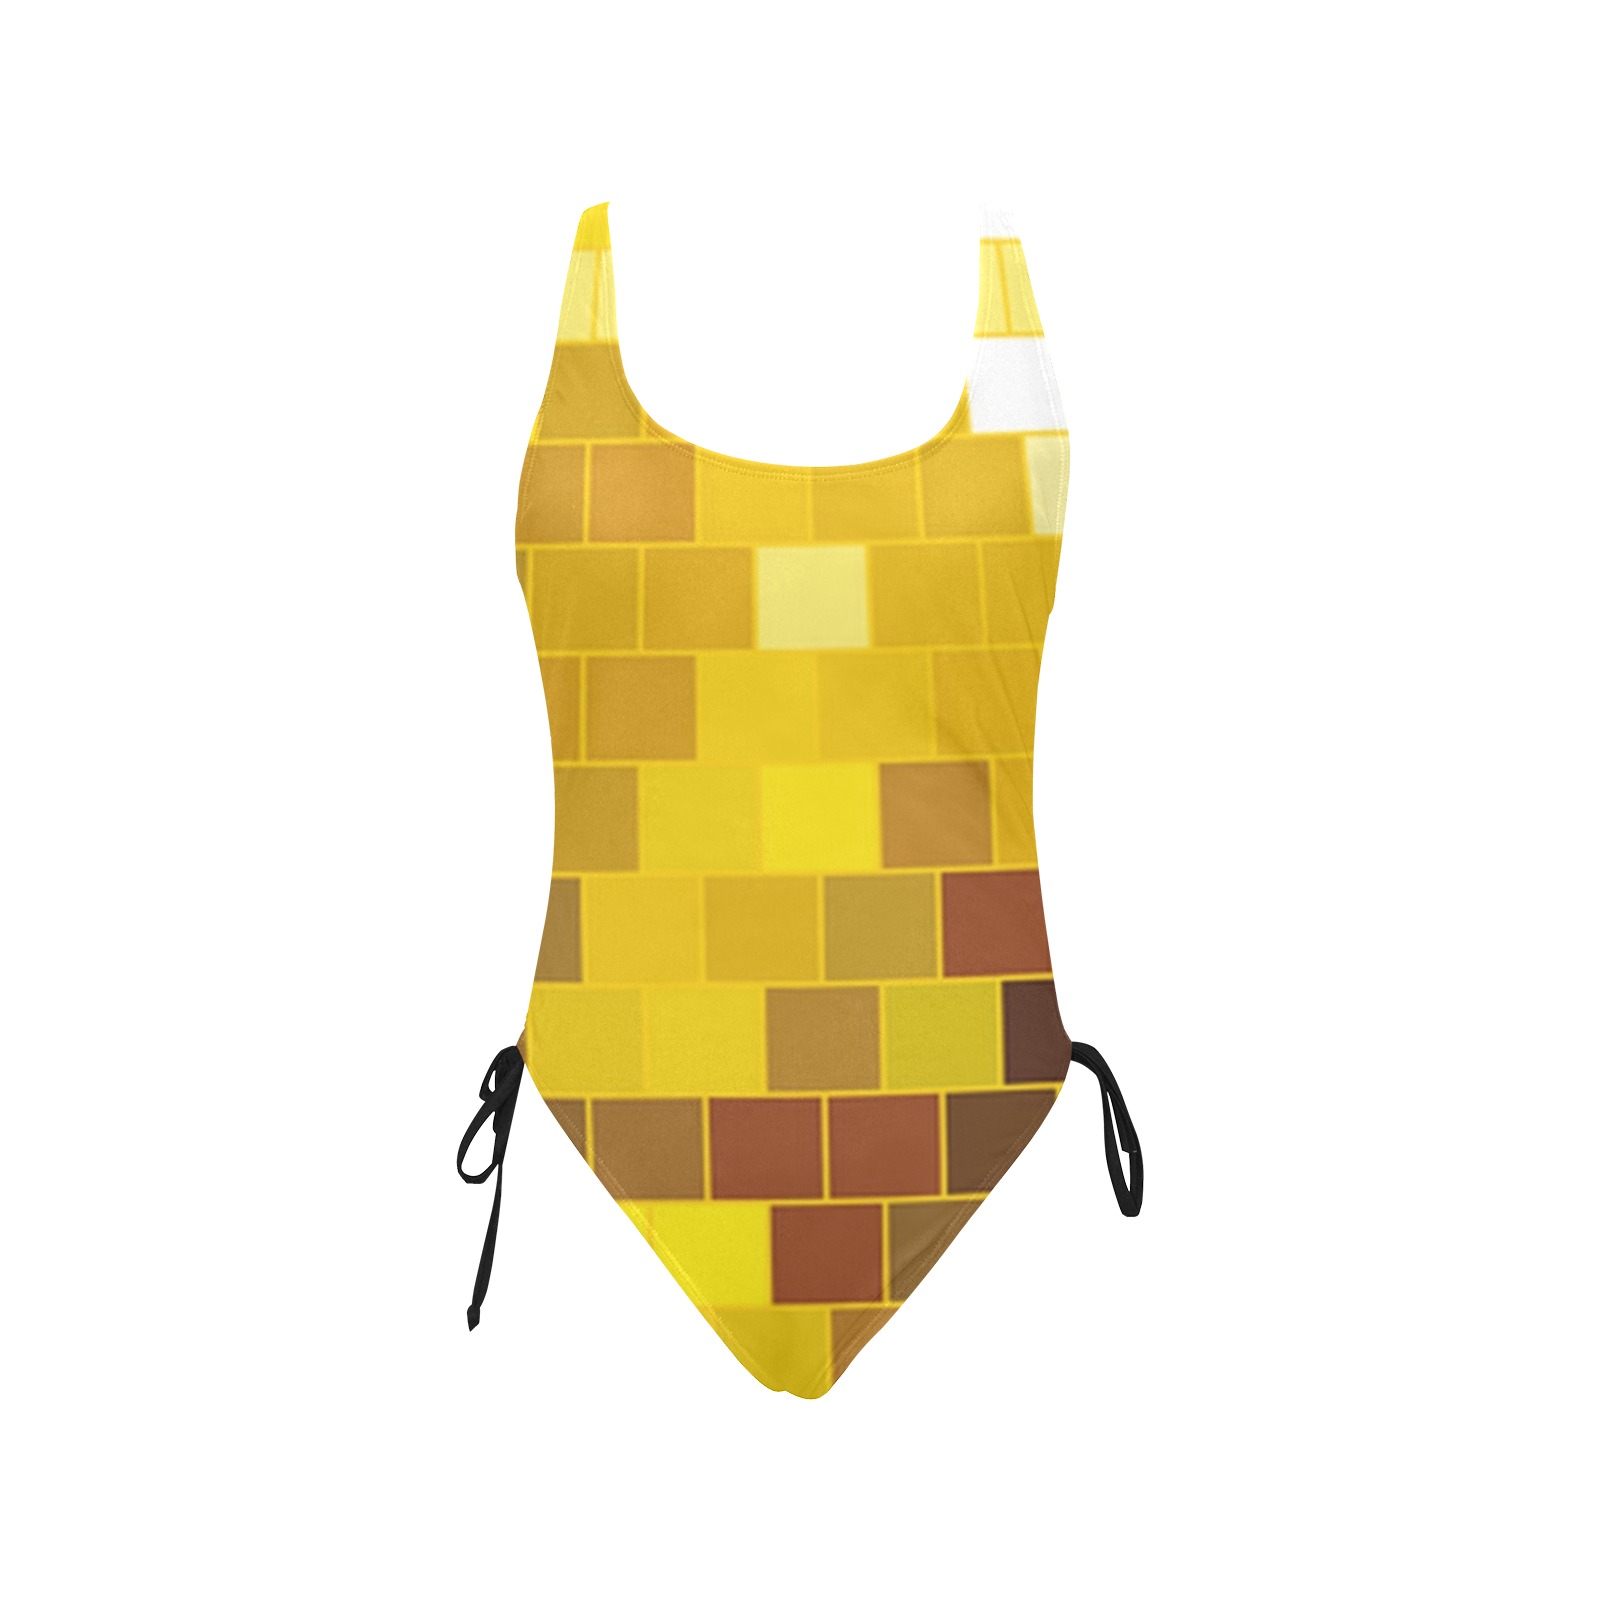 DISCO BALL 2 Drawstring Side One-Piece Swimsuit (Model S14)